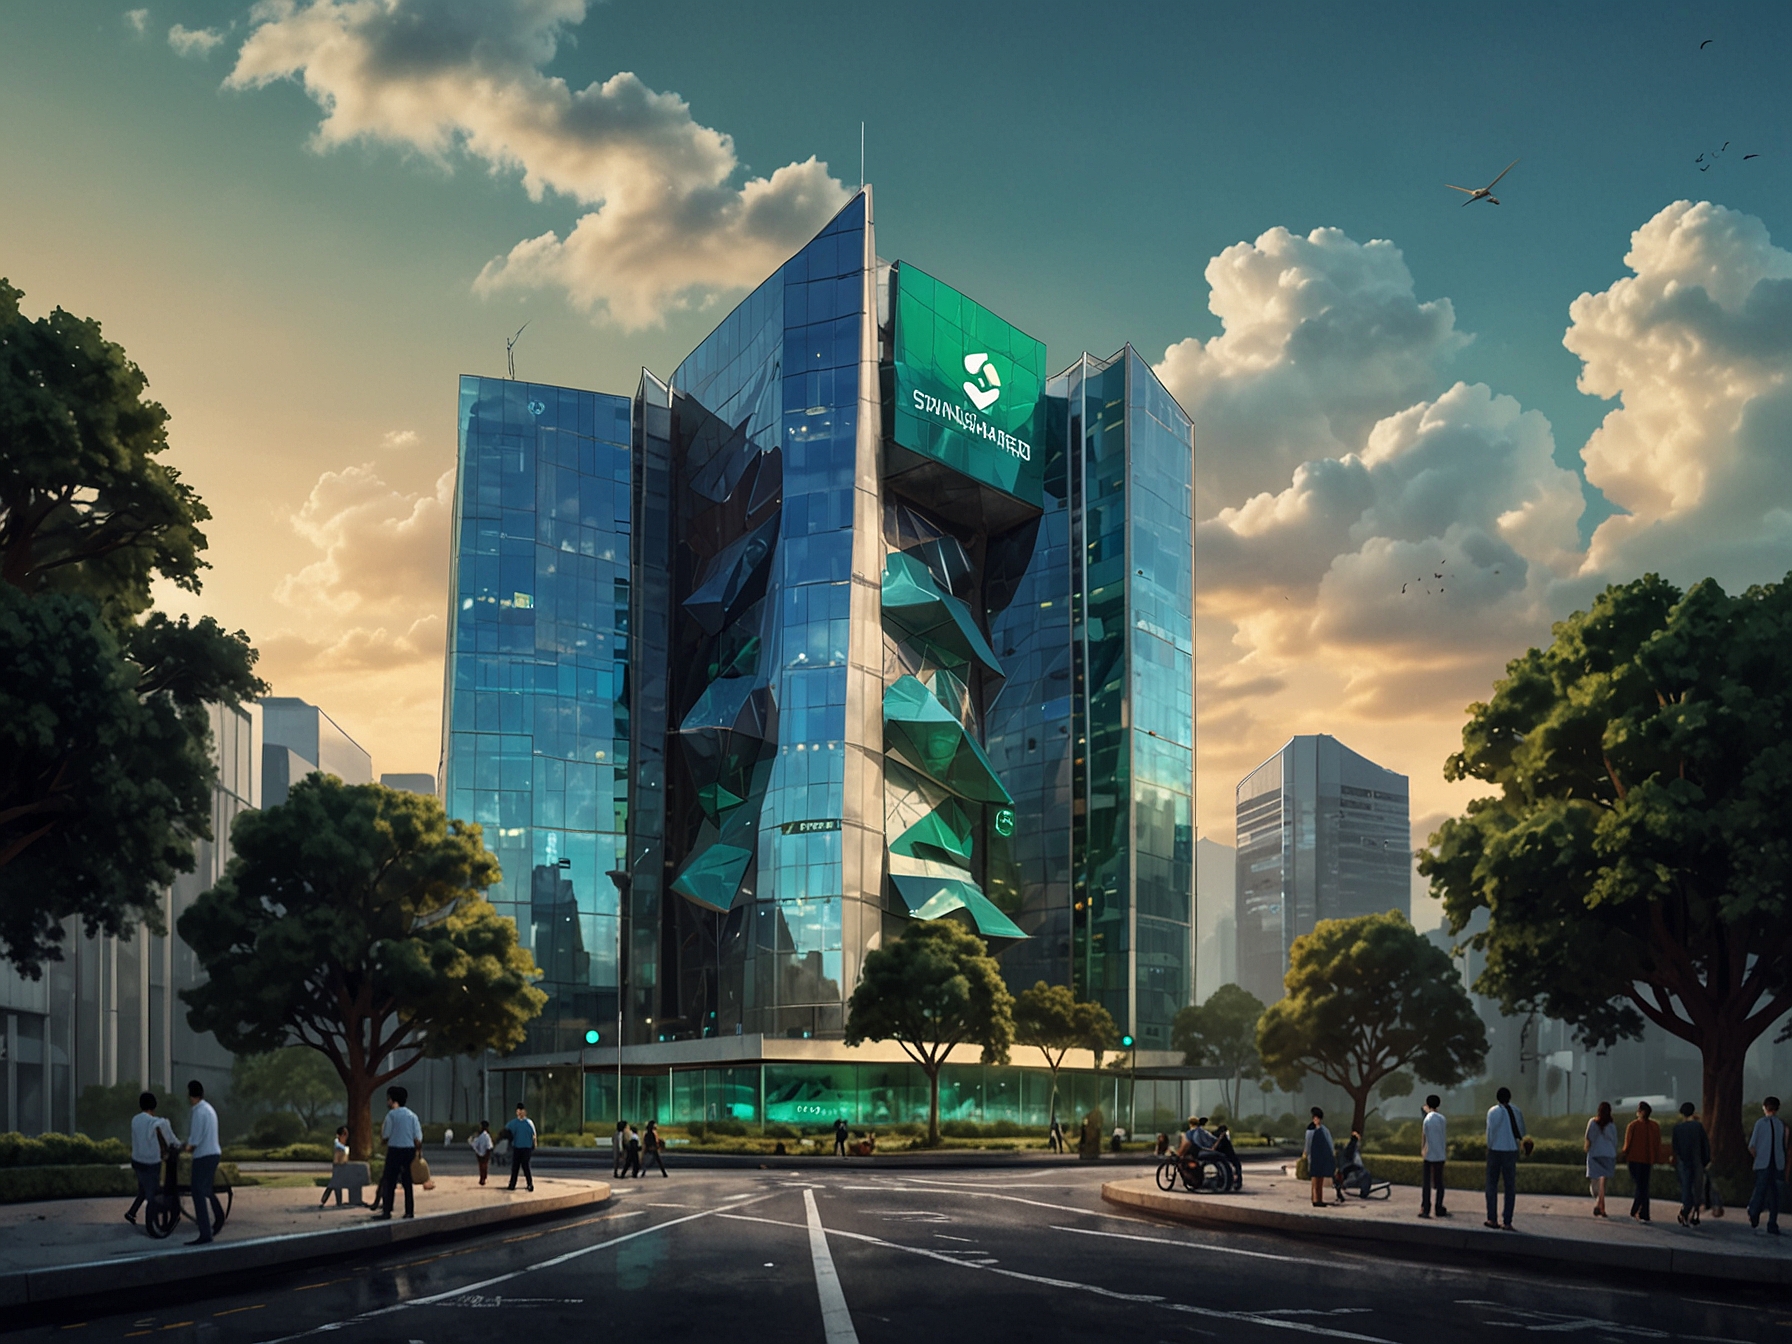 A futuristic depiction of Standard Chartered's headquarters integrated with digital and blockchain elements, symbolizing the bank's innovative leap into the cryptocurrency space.